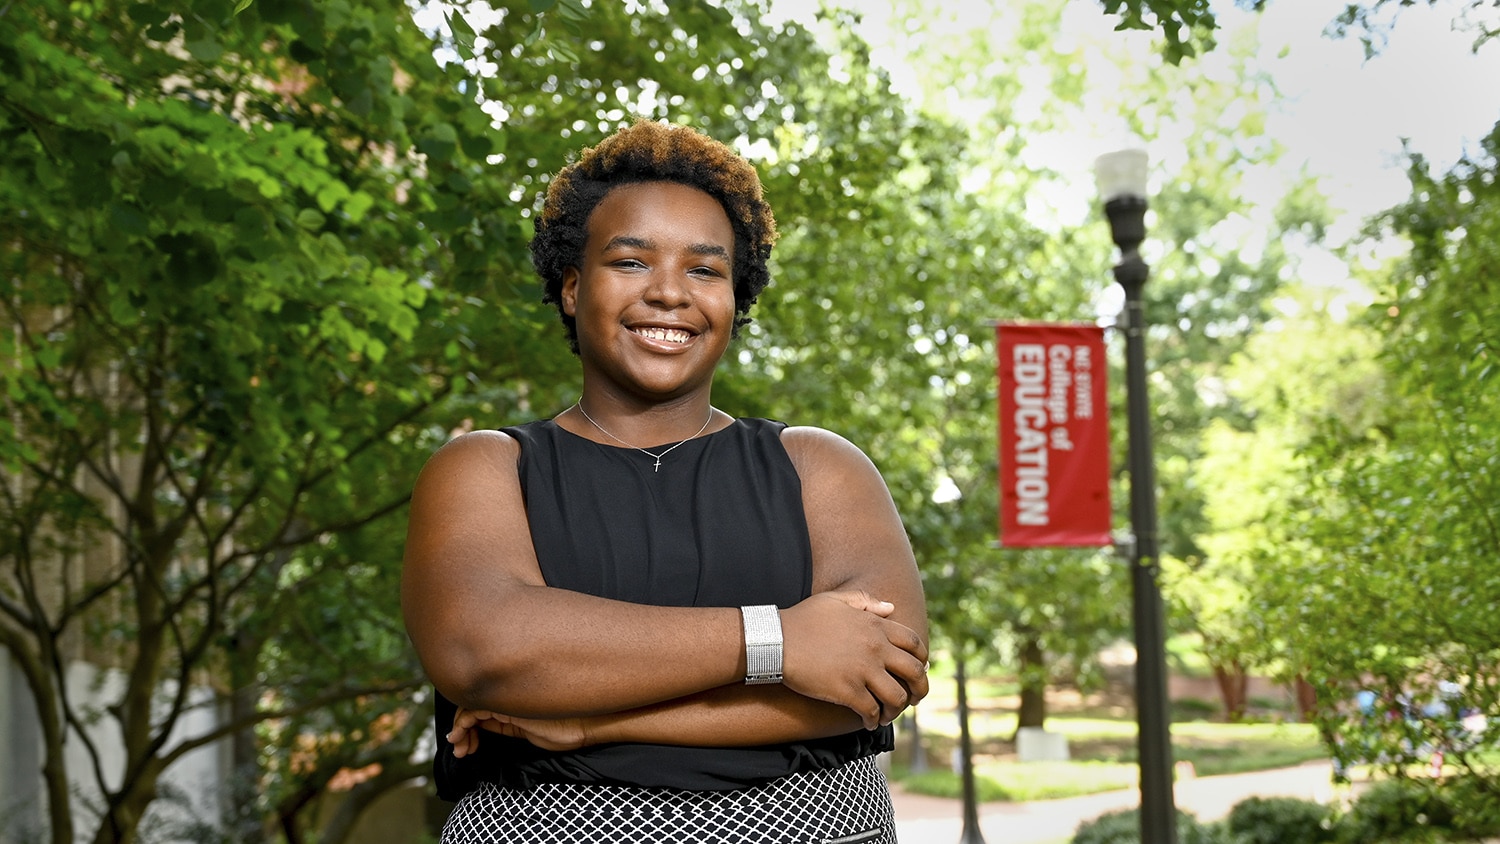 Alycia Morgan is pictured outdoors with a lamp post banner in the background that reads "NC State College of Education".